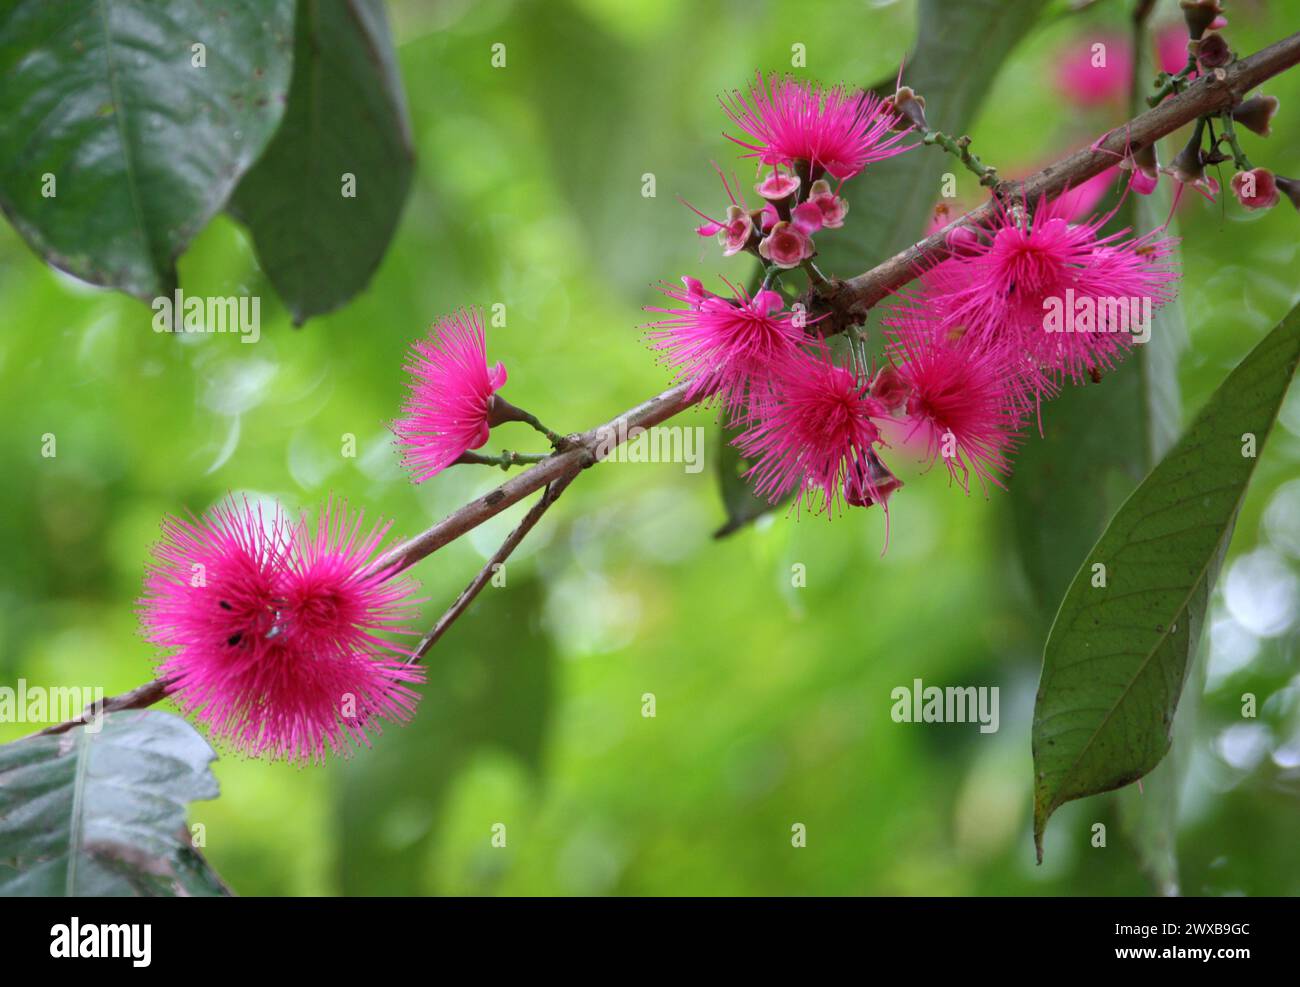 Flowers of the Malay Apple or Rose Apple, Syzygium malaccense (malacensis), Myrtaceae. Costa Rica. Syzygium malaccense is a species of flowering tree. Stock Photo